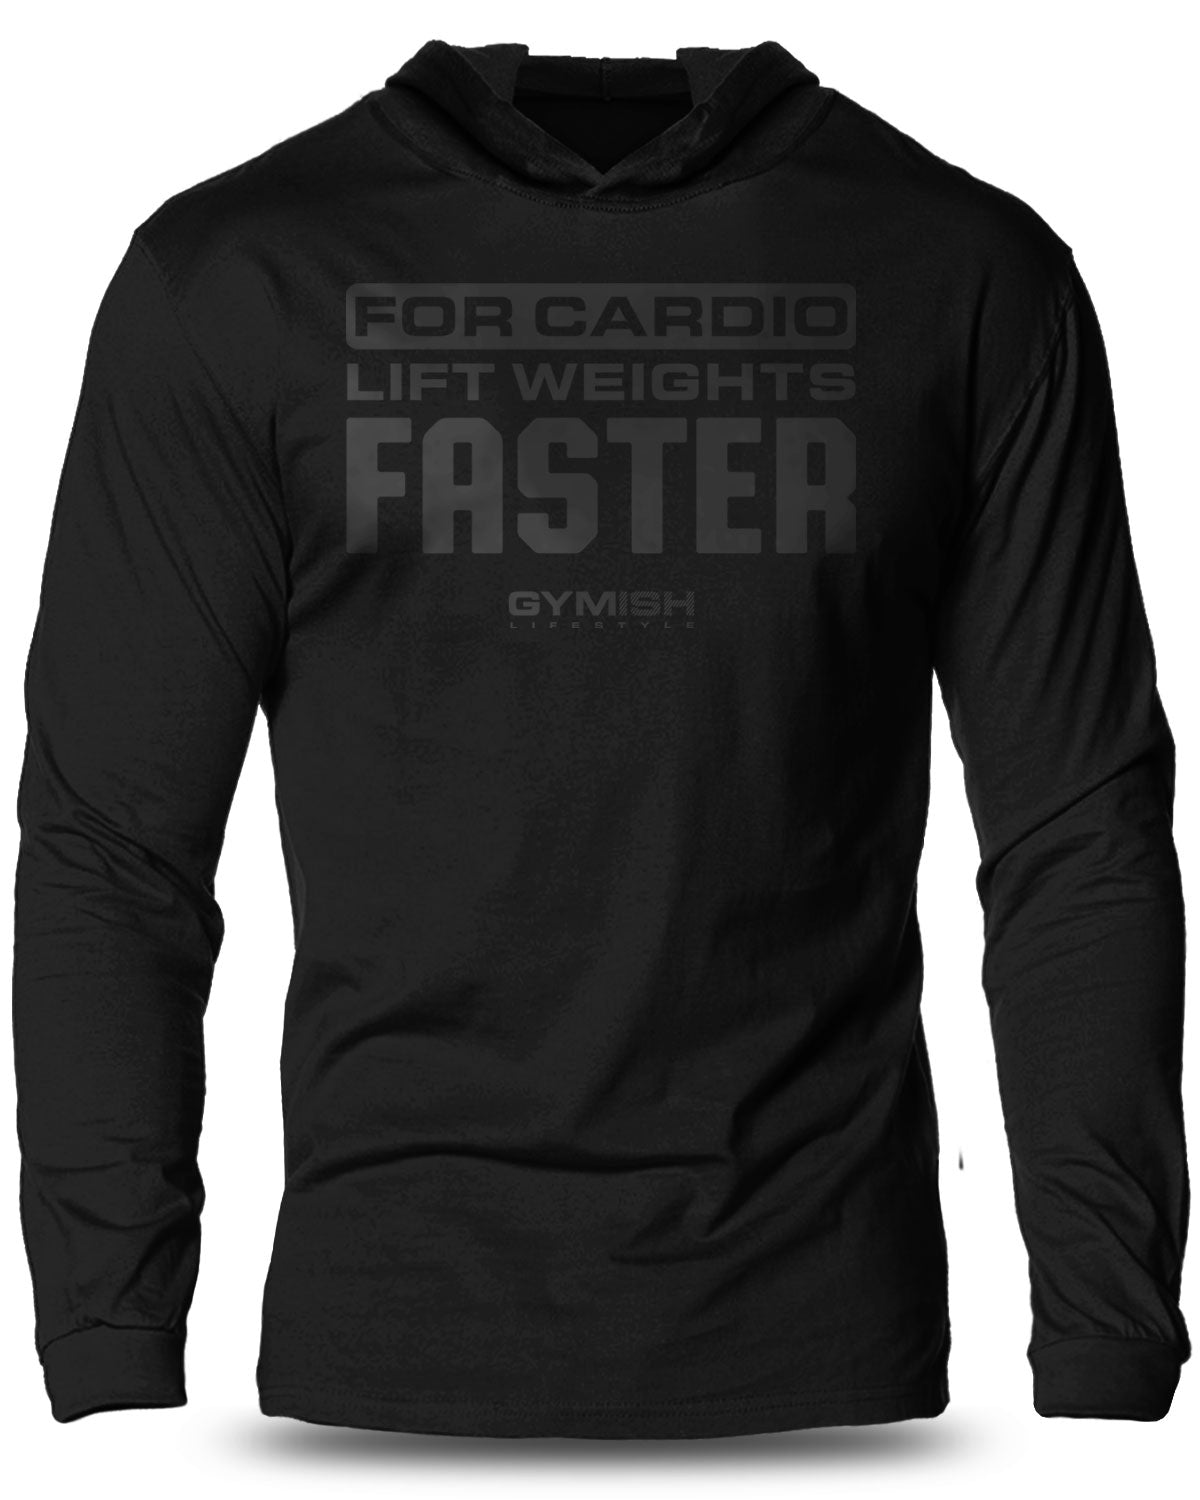 093- FOR CARDIO LIFT WEIGHTS FASTER Lightweight Long Sleeve Hooded T-shirt for Men